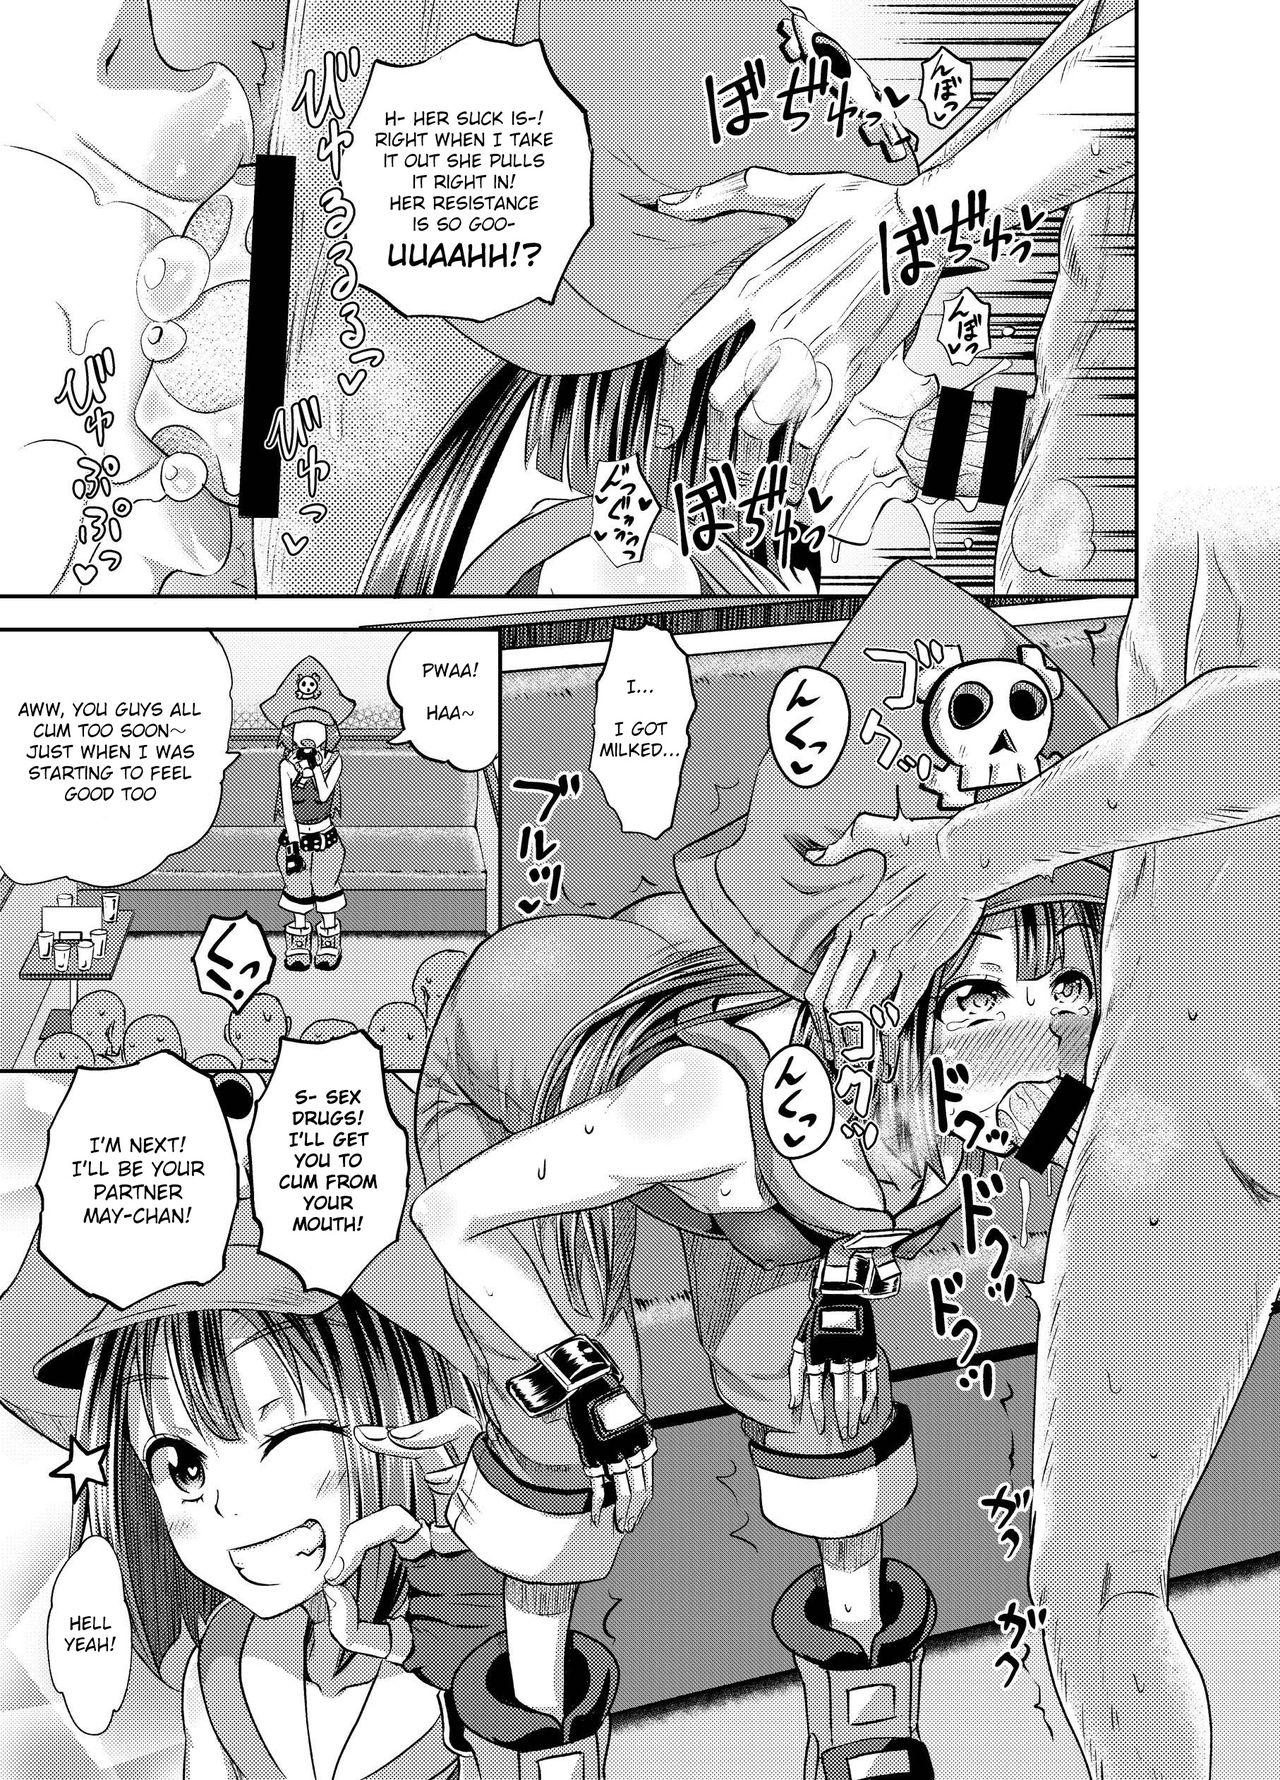 Pov Blow Job Jellyfish Kaizokudan e Youkoso! | Welcome to The Jellyfish Pleasure Club! - Guilty gear Virginity - Page 10